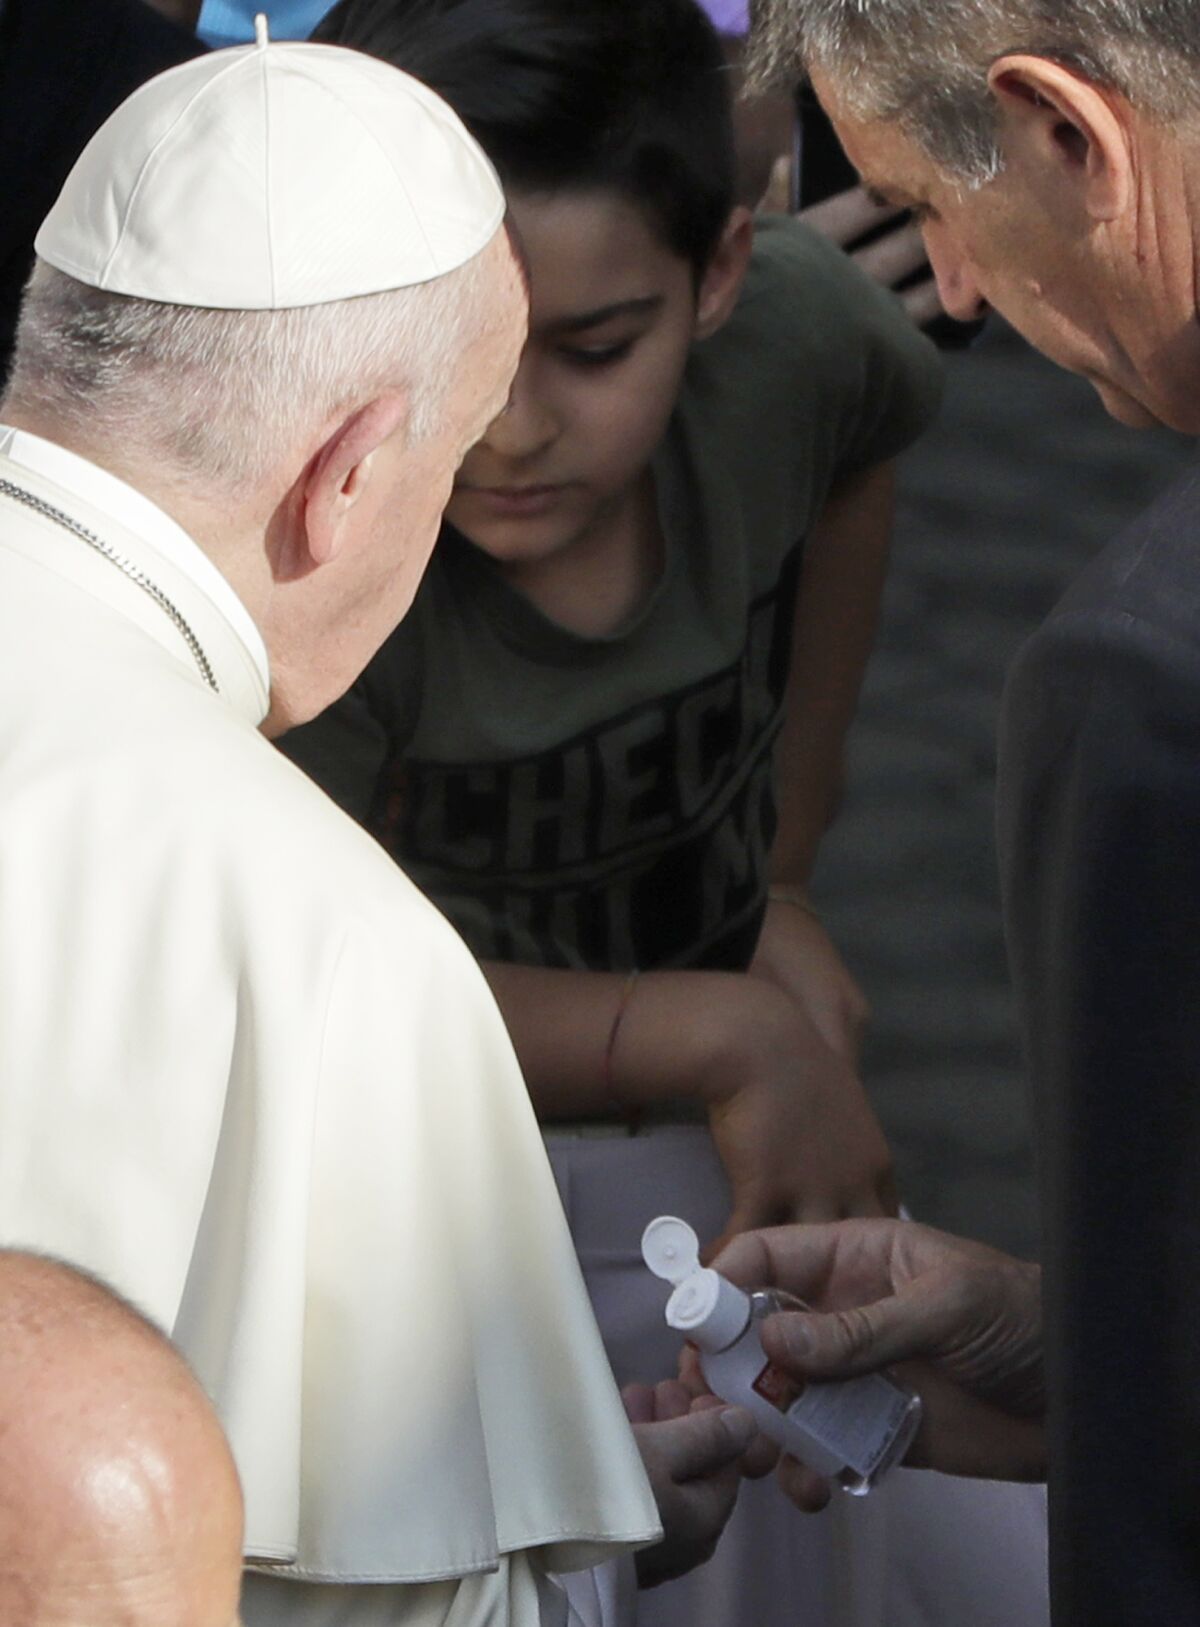 Pope Francis has his hands sanitized by his personal assistant during his weekly general audience general audience in San Damaso courtyard at the Vatican, Wednesday, Sept. 9, 2020. (AP Photo/Andrew Medichini)